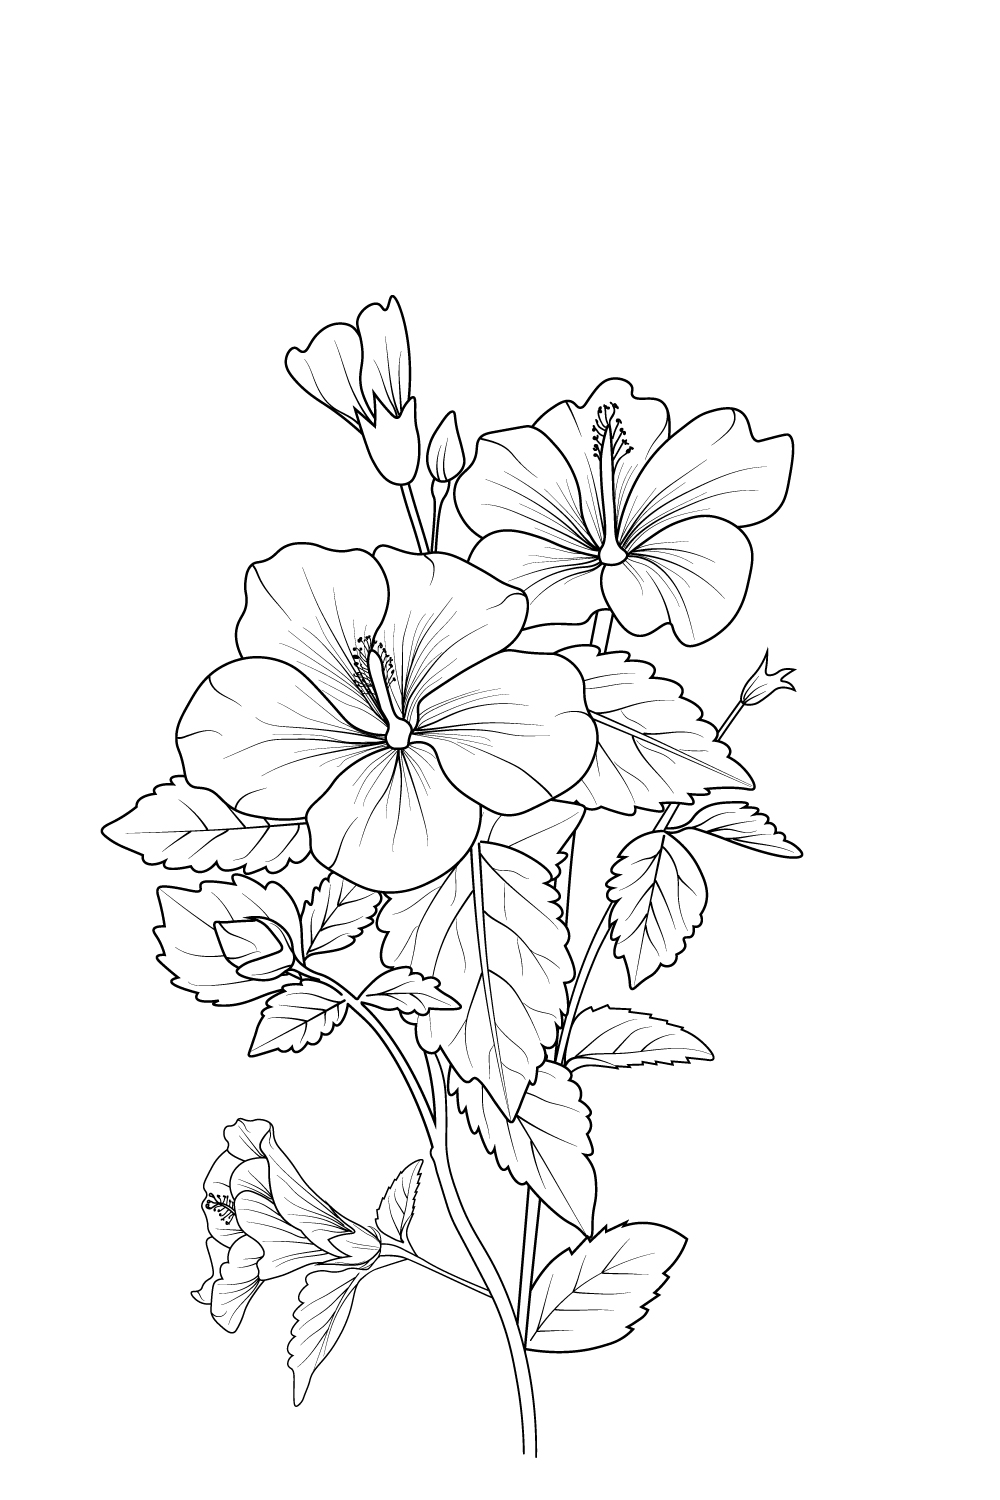 White hibiscus flower and leaf drawing with line Vector Image